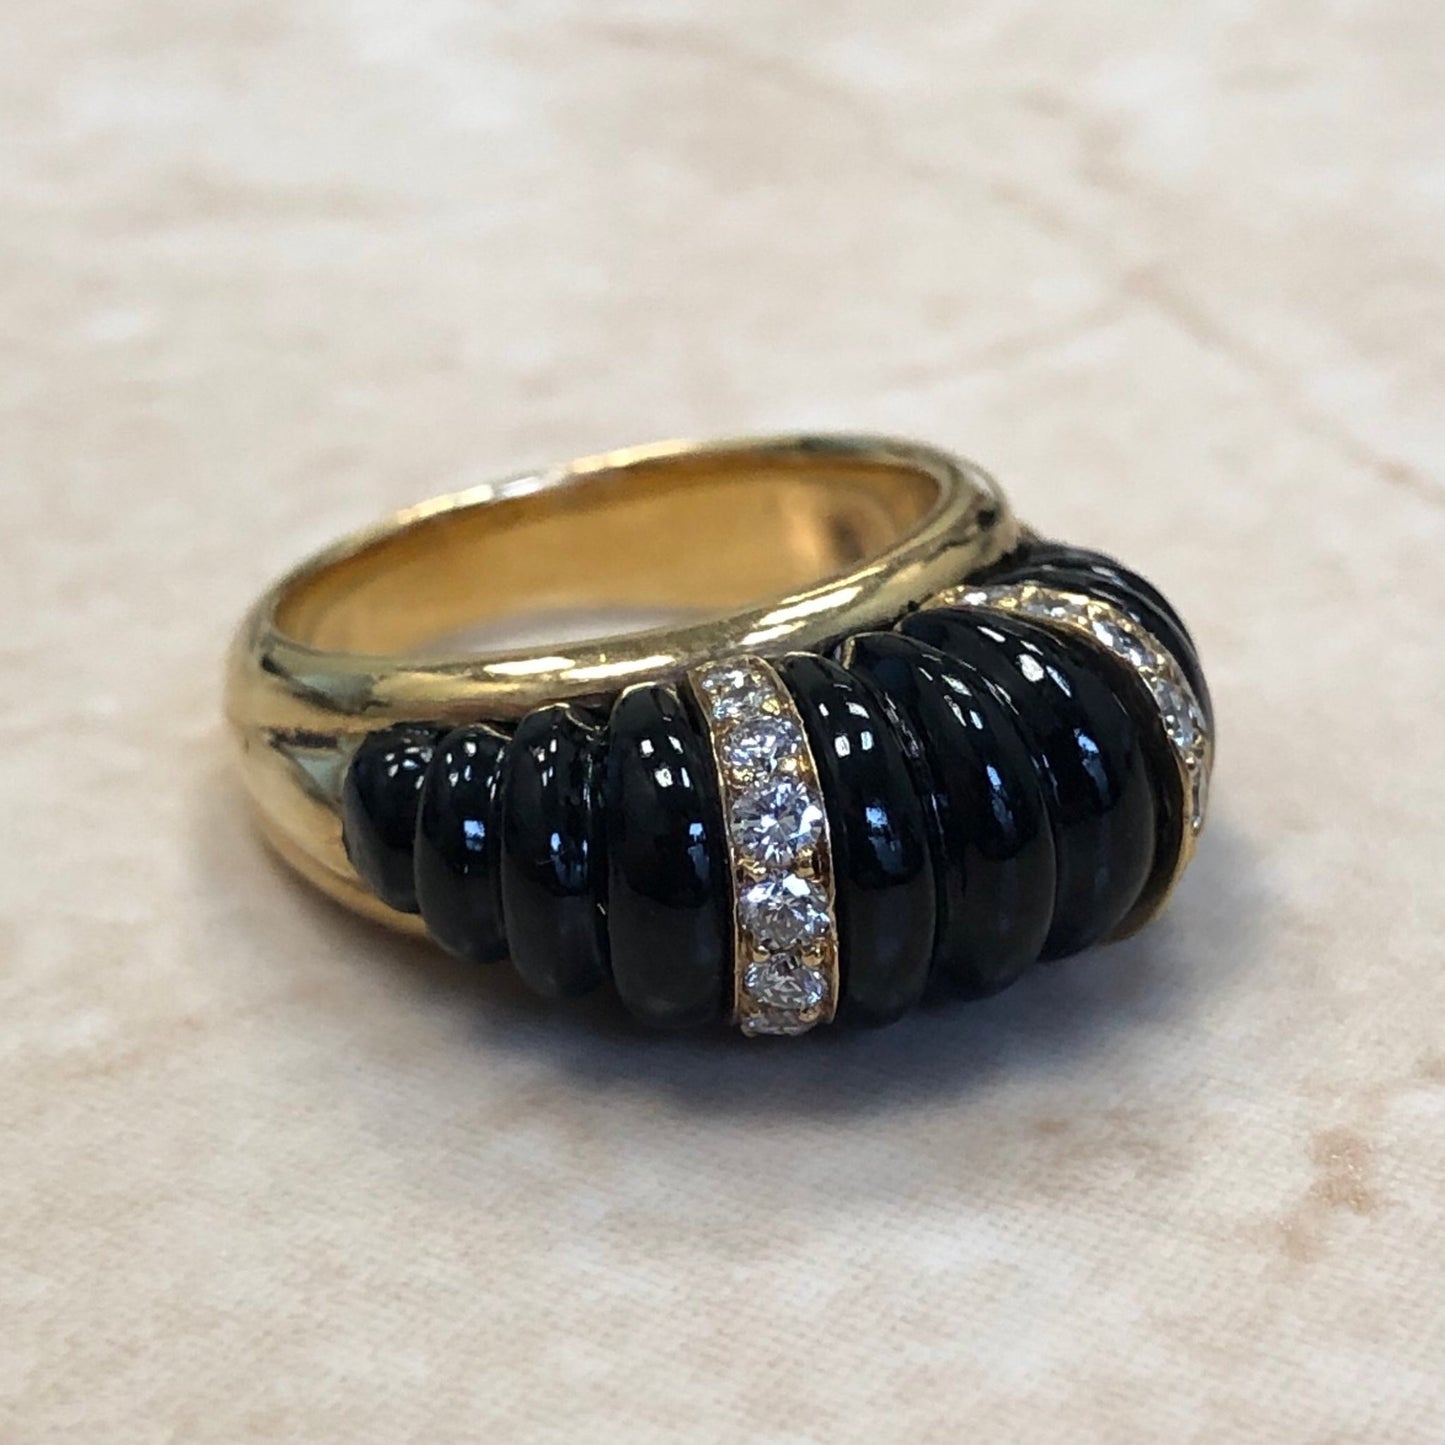 Vintage 18 Karat Yellow Gold Carved Black Onyx & Diamond Ring Signed Carvin French Jewelers